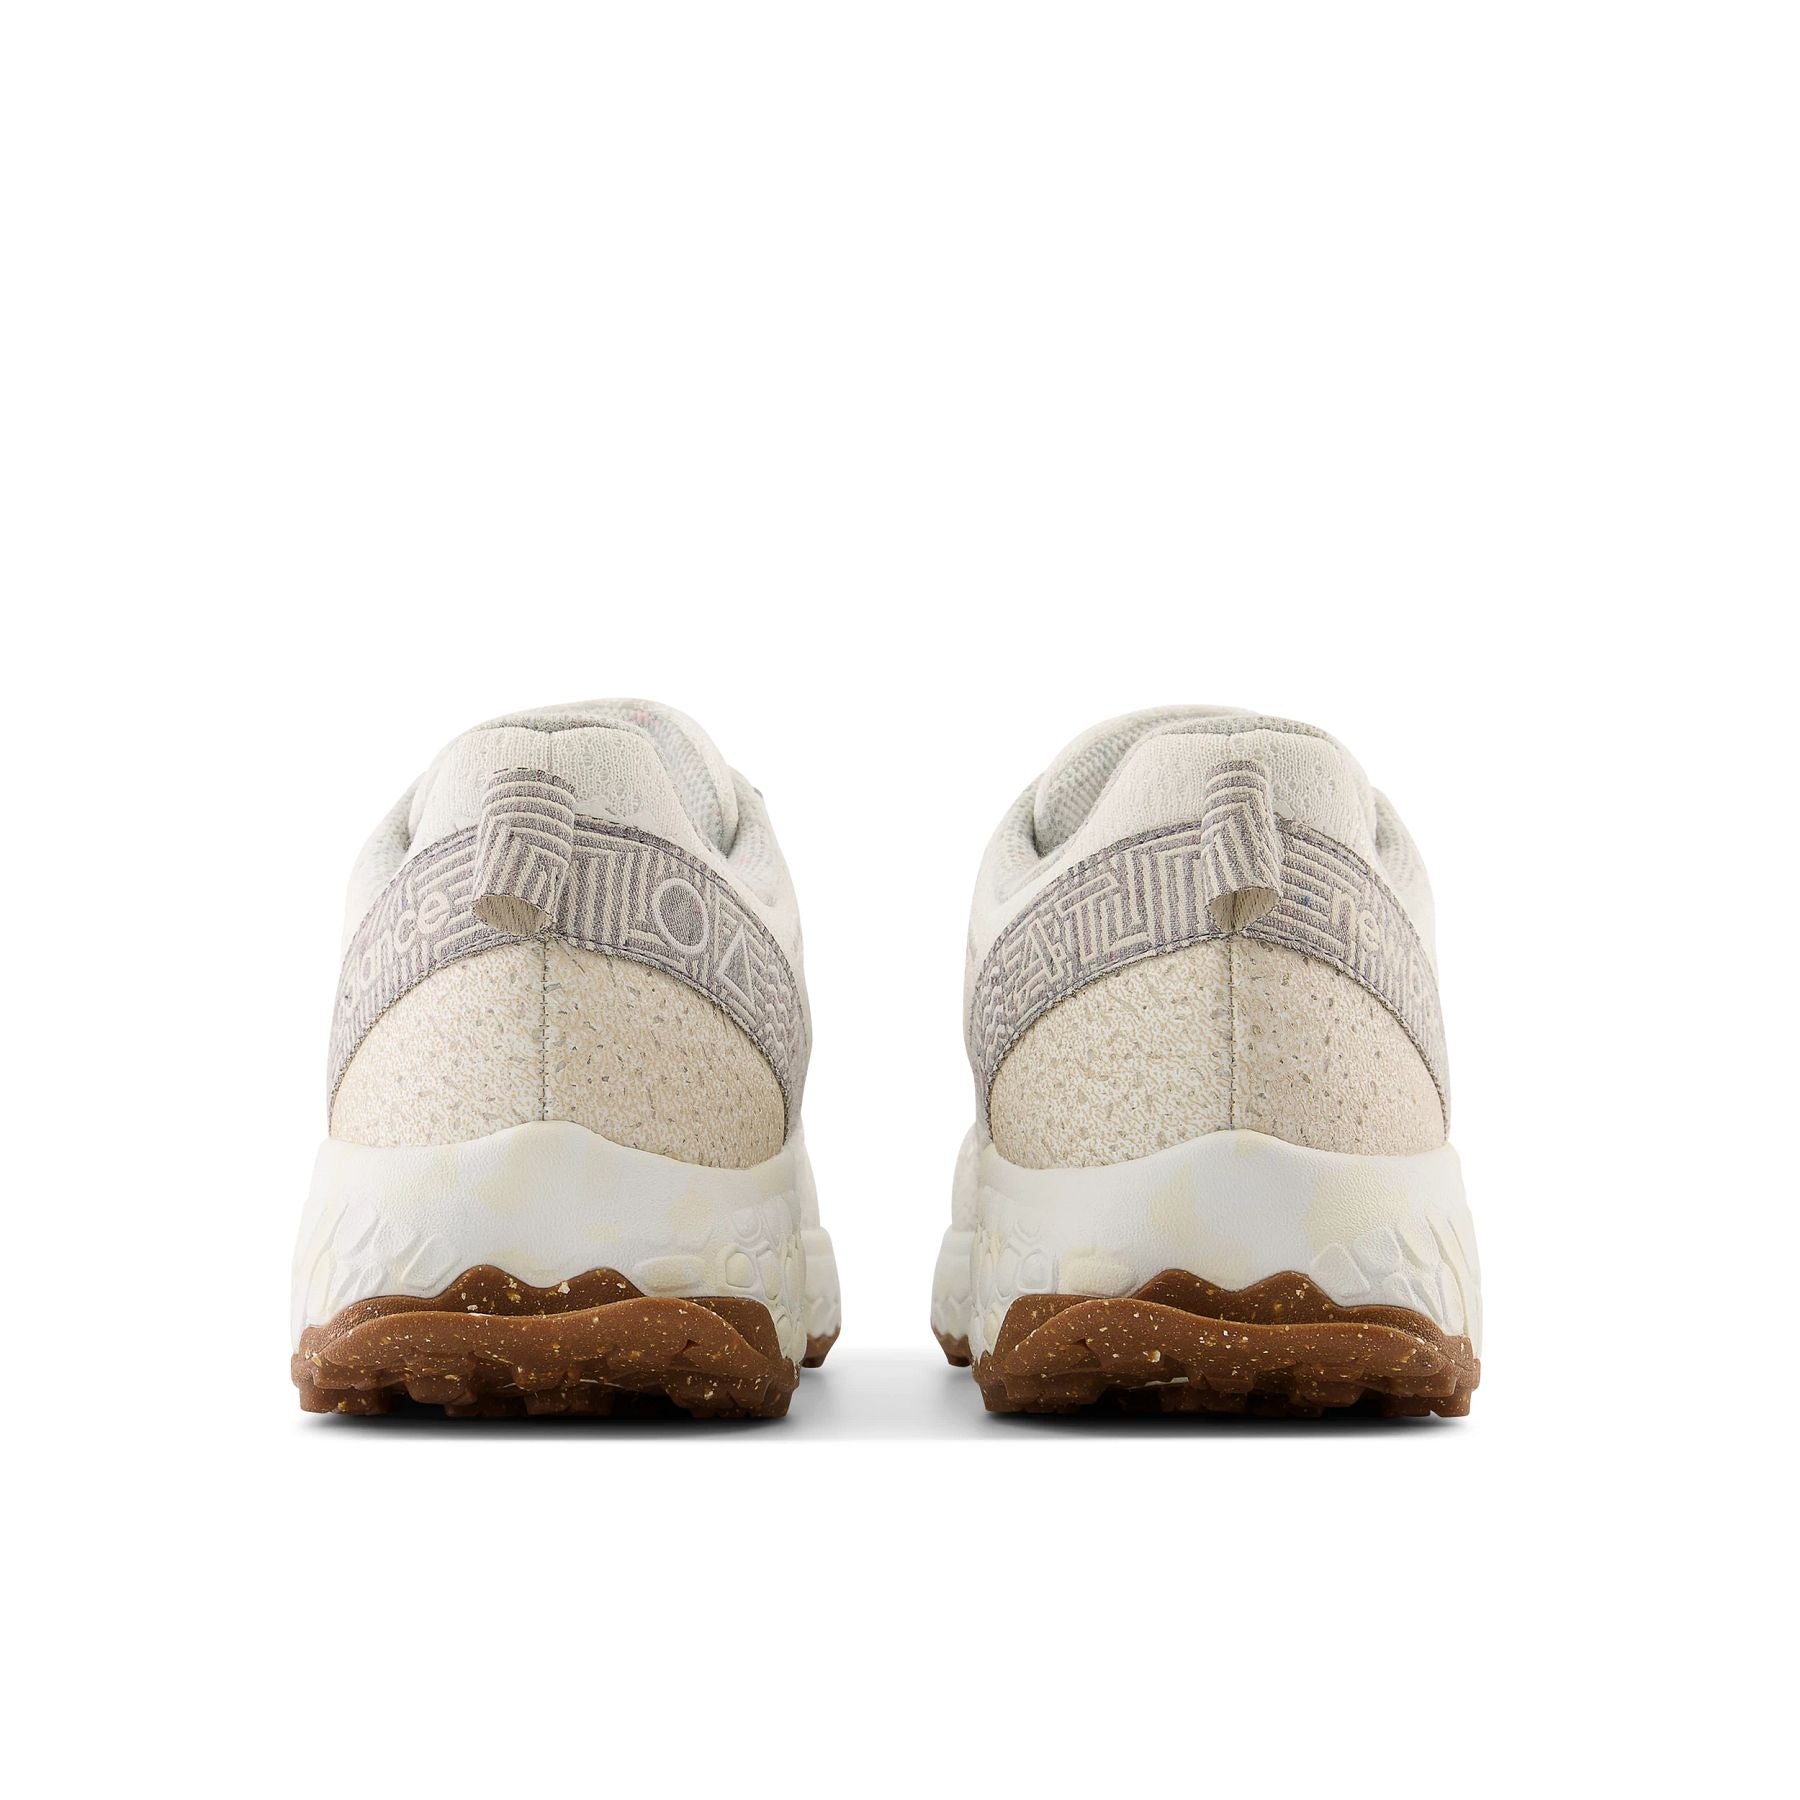 Back view of the Men's Fresh Foam X Hierro V7 trail shoe by New Balance in the color Undyed with Turtledove